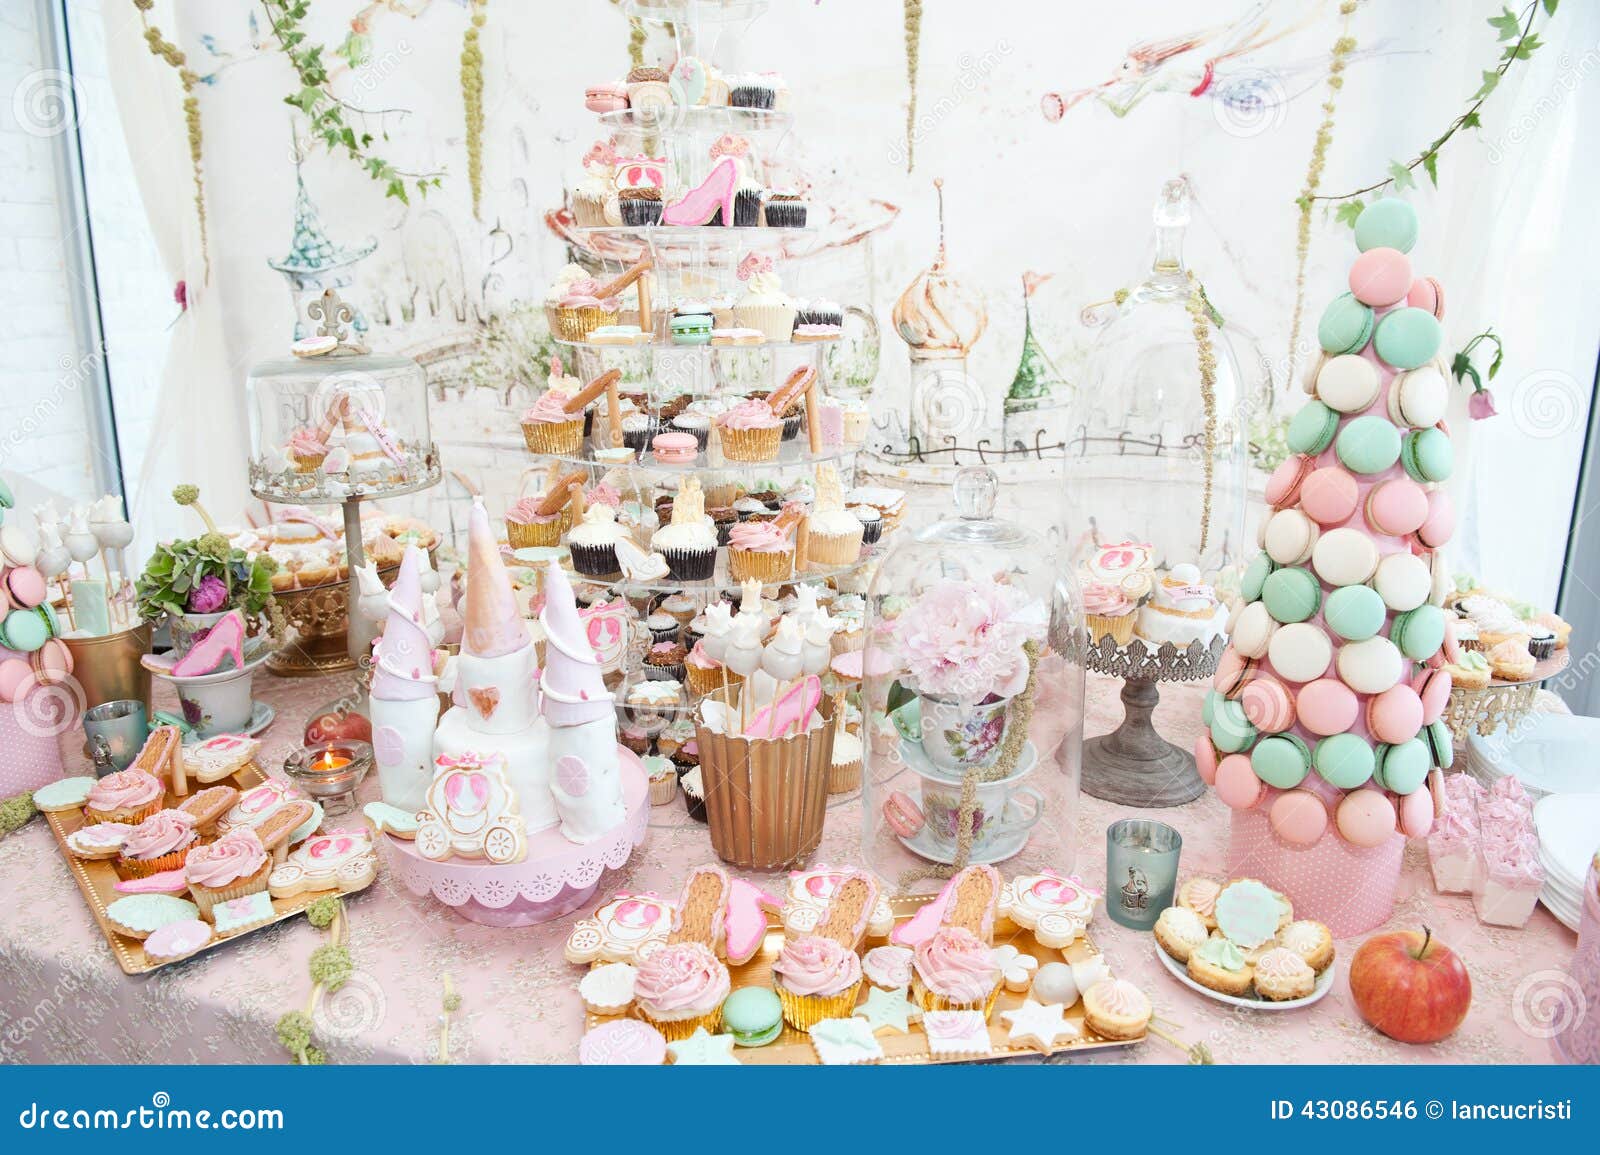 wedding decoration with pastel colored cupcakes, meringues, muffins and macarons